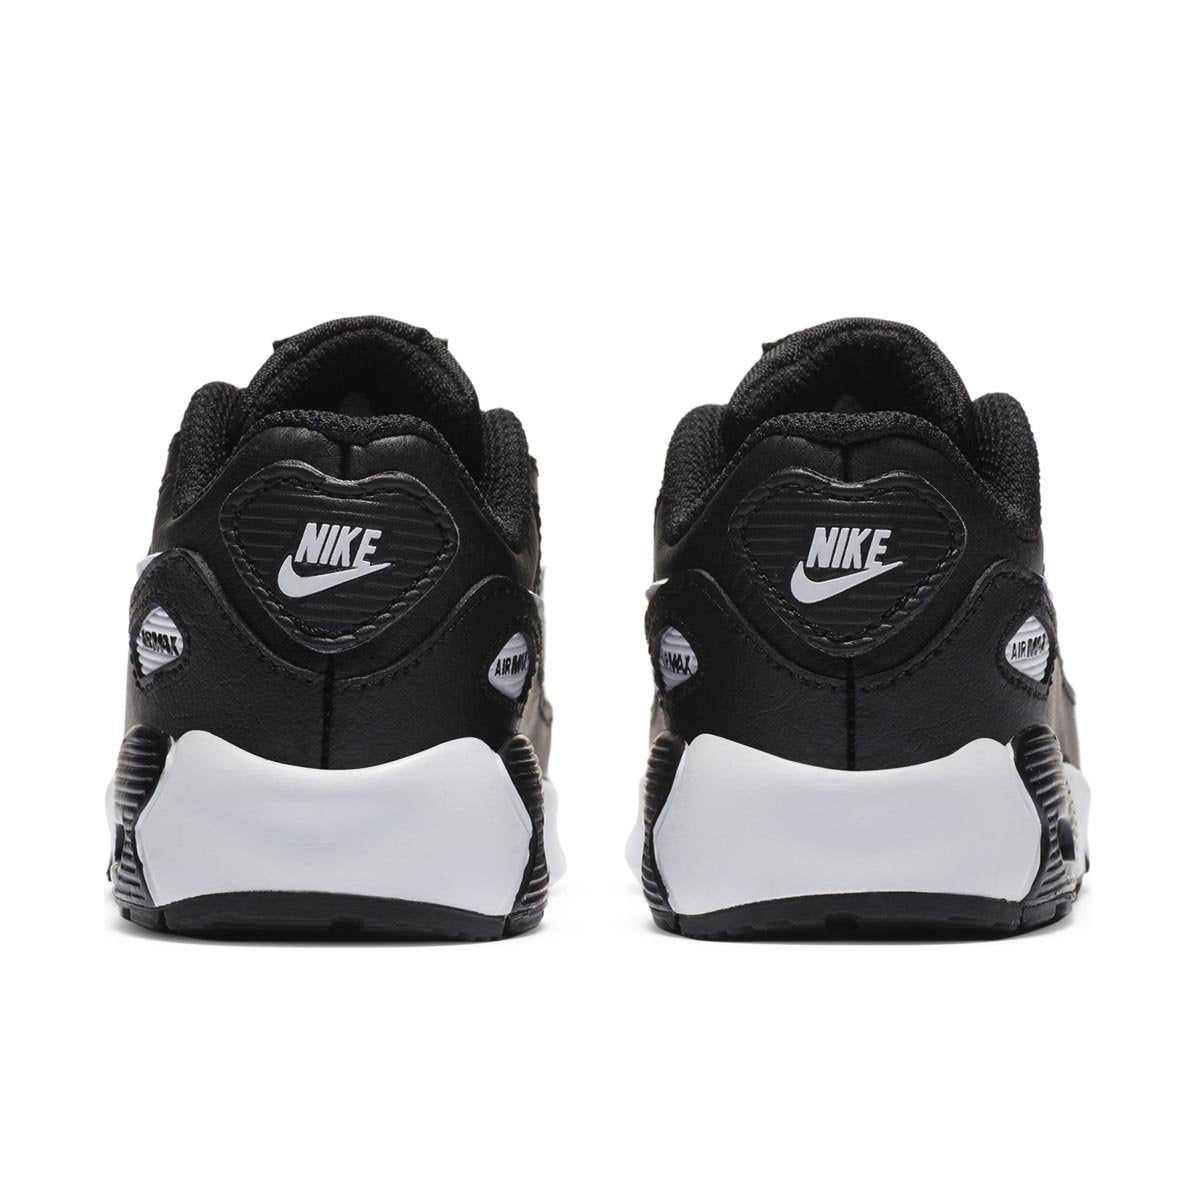 cheap nike zoom glove paypal card code number